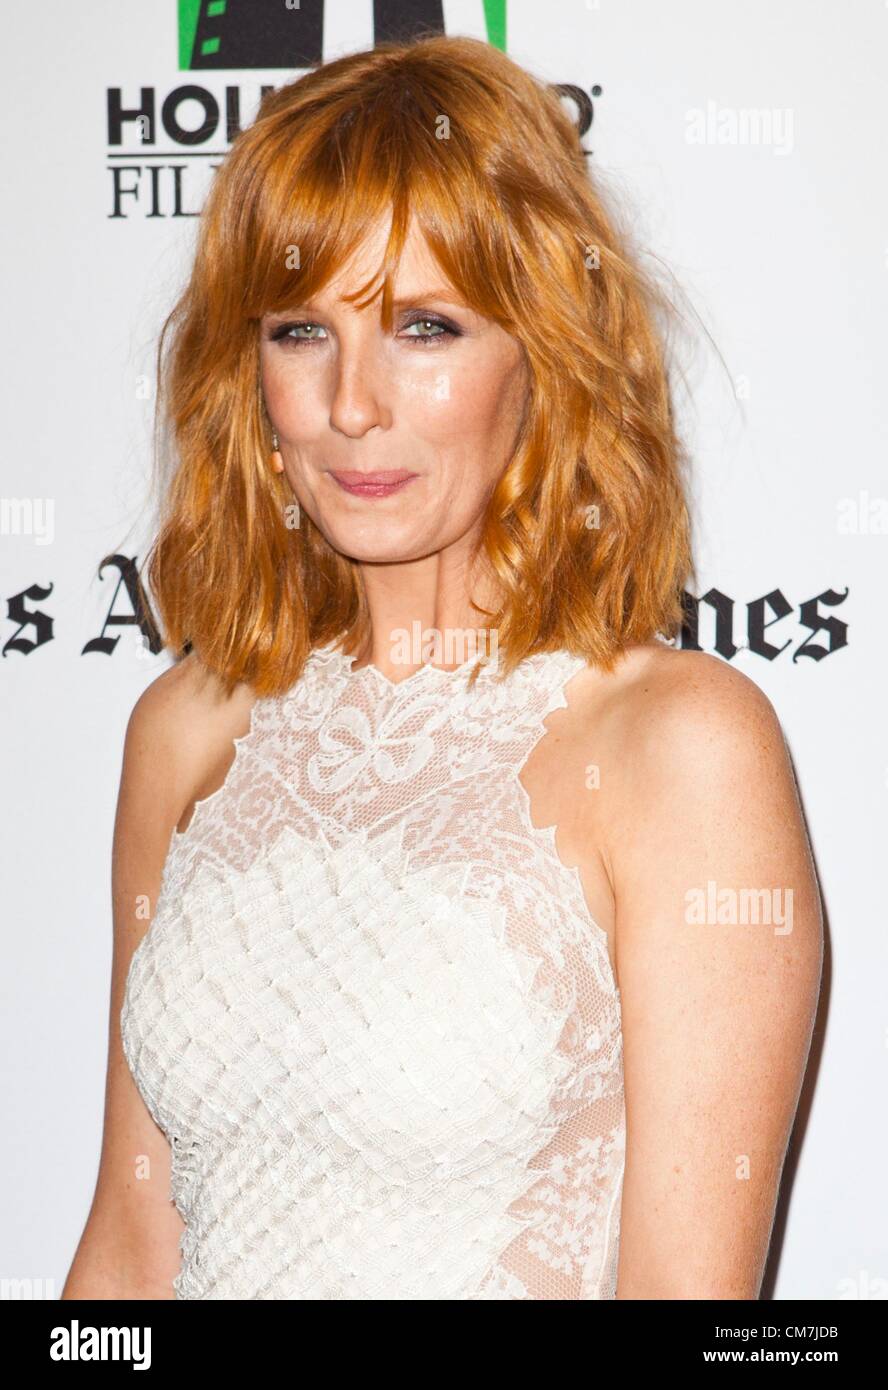 Kelly Reilly at arrivals for 16th Annual Hollywood Film Awards Gala, The Beverly Hilton Hotel, Beverly Hills, CA October 22, 2012. Photo By: Emiley Schweich/Everett Collection Stock Photo